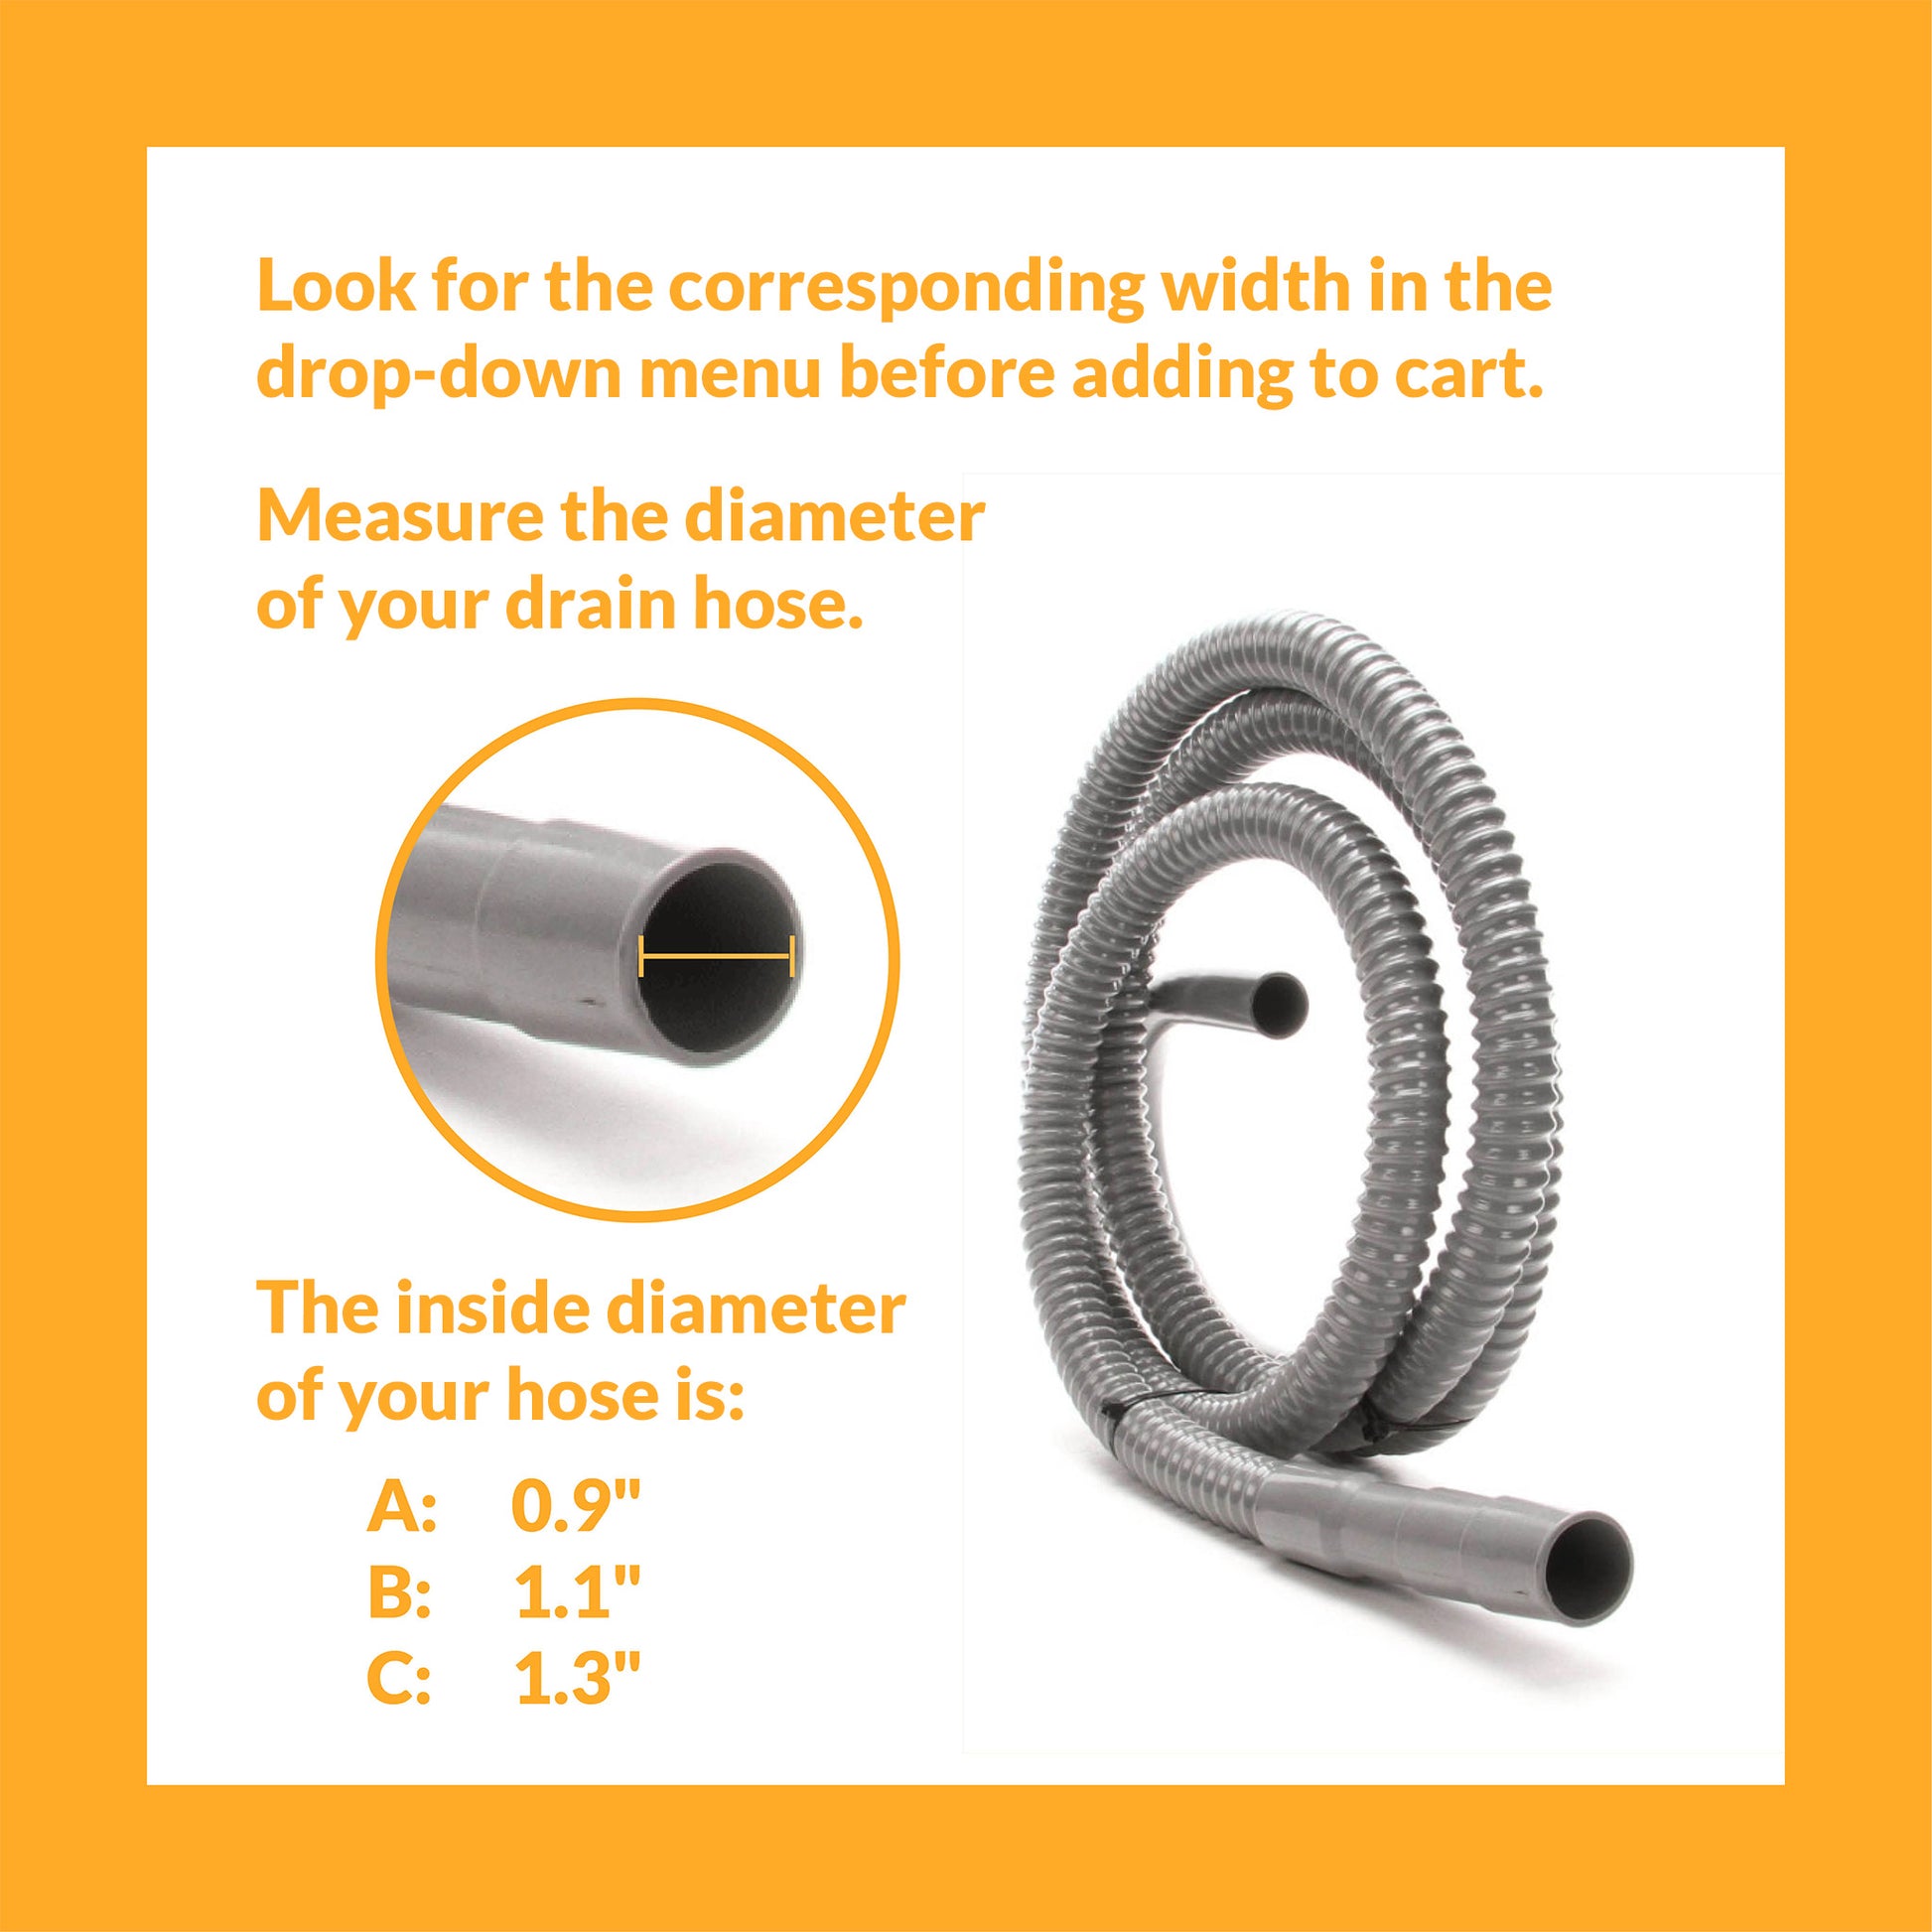 A washing machine's drain hose, with a diagram indicating the diameter of the hose that needs to be measured for the PlanetCare microfiber filter